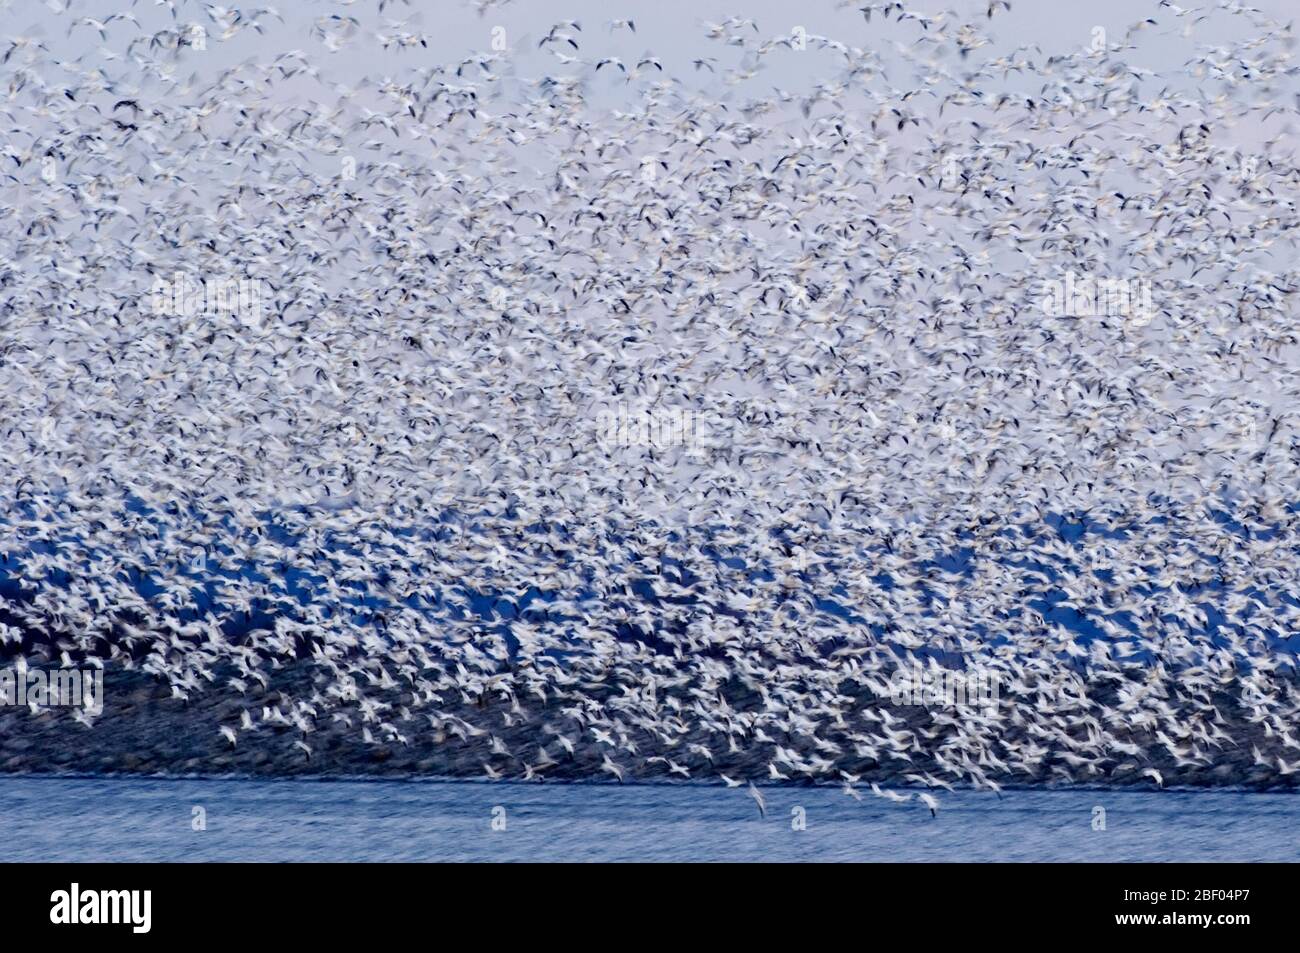 Snow geese flock flight abstraction Stock Photo